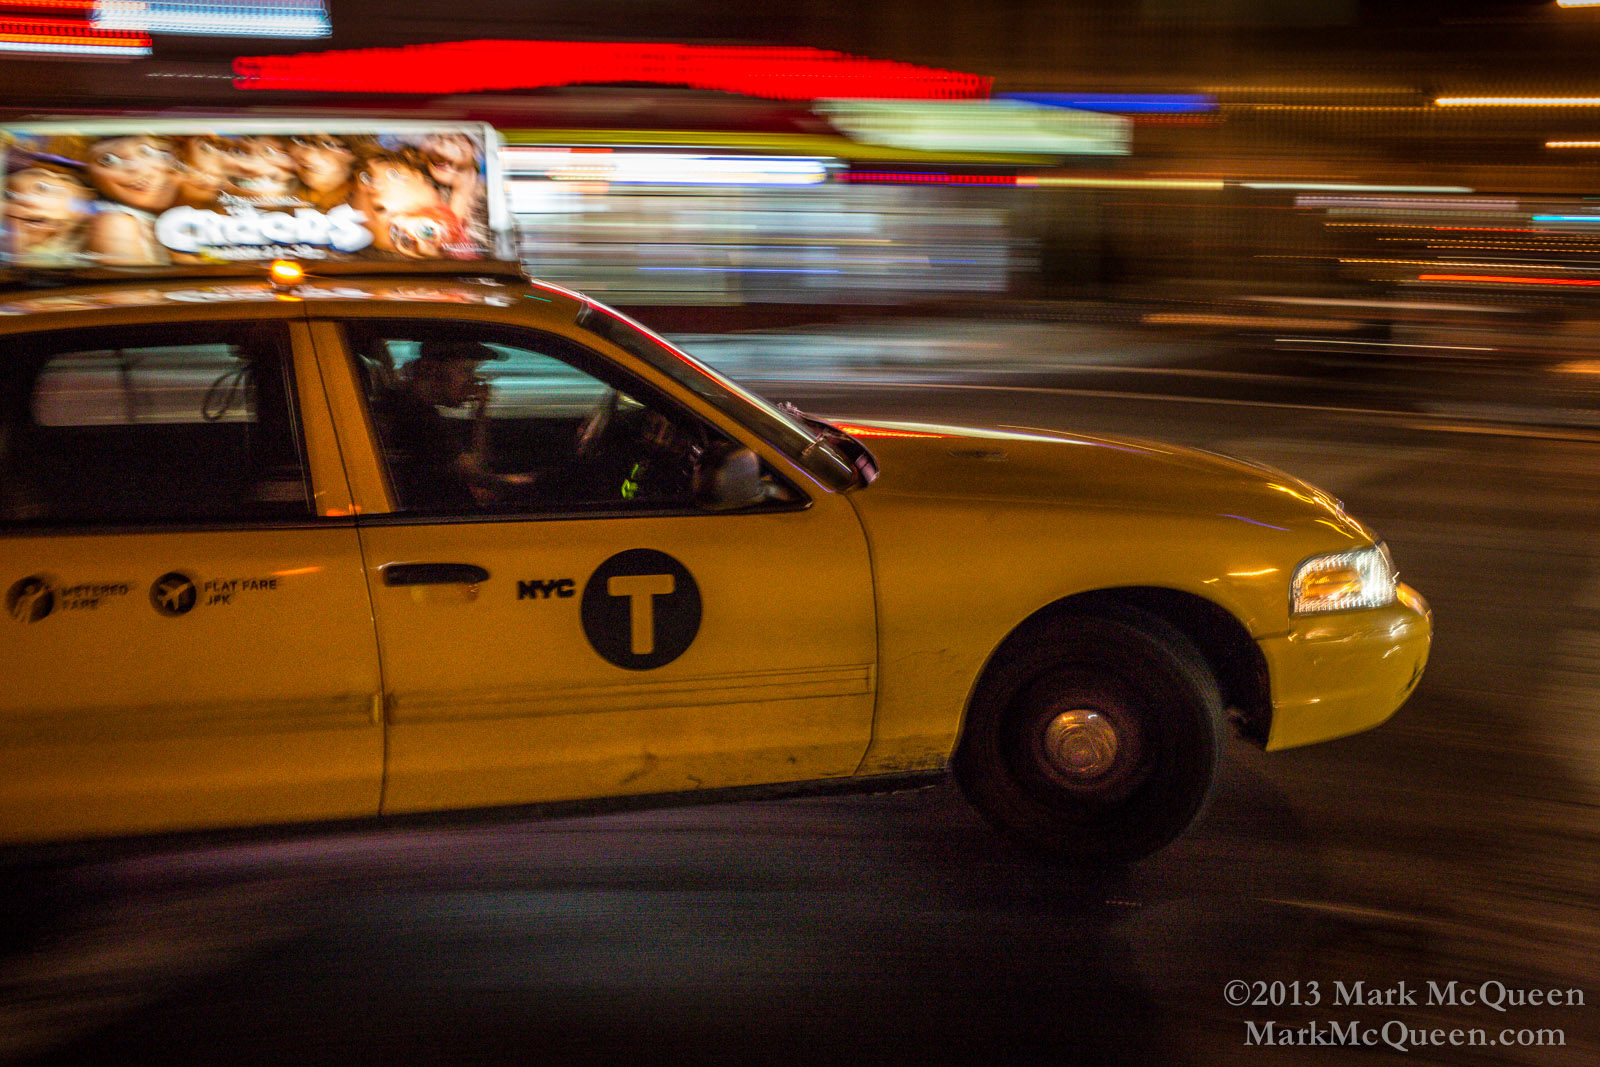 Taxi in motion: New York City Street Photography, nighttime in NYC